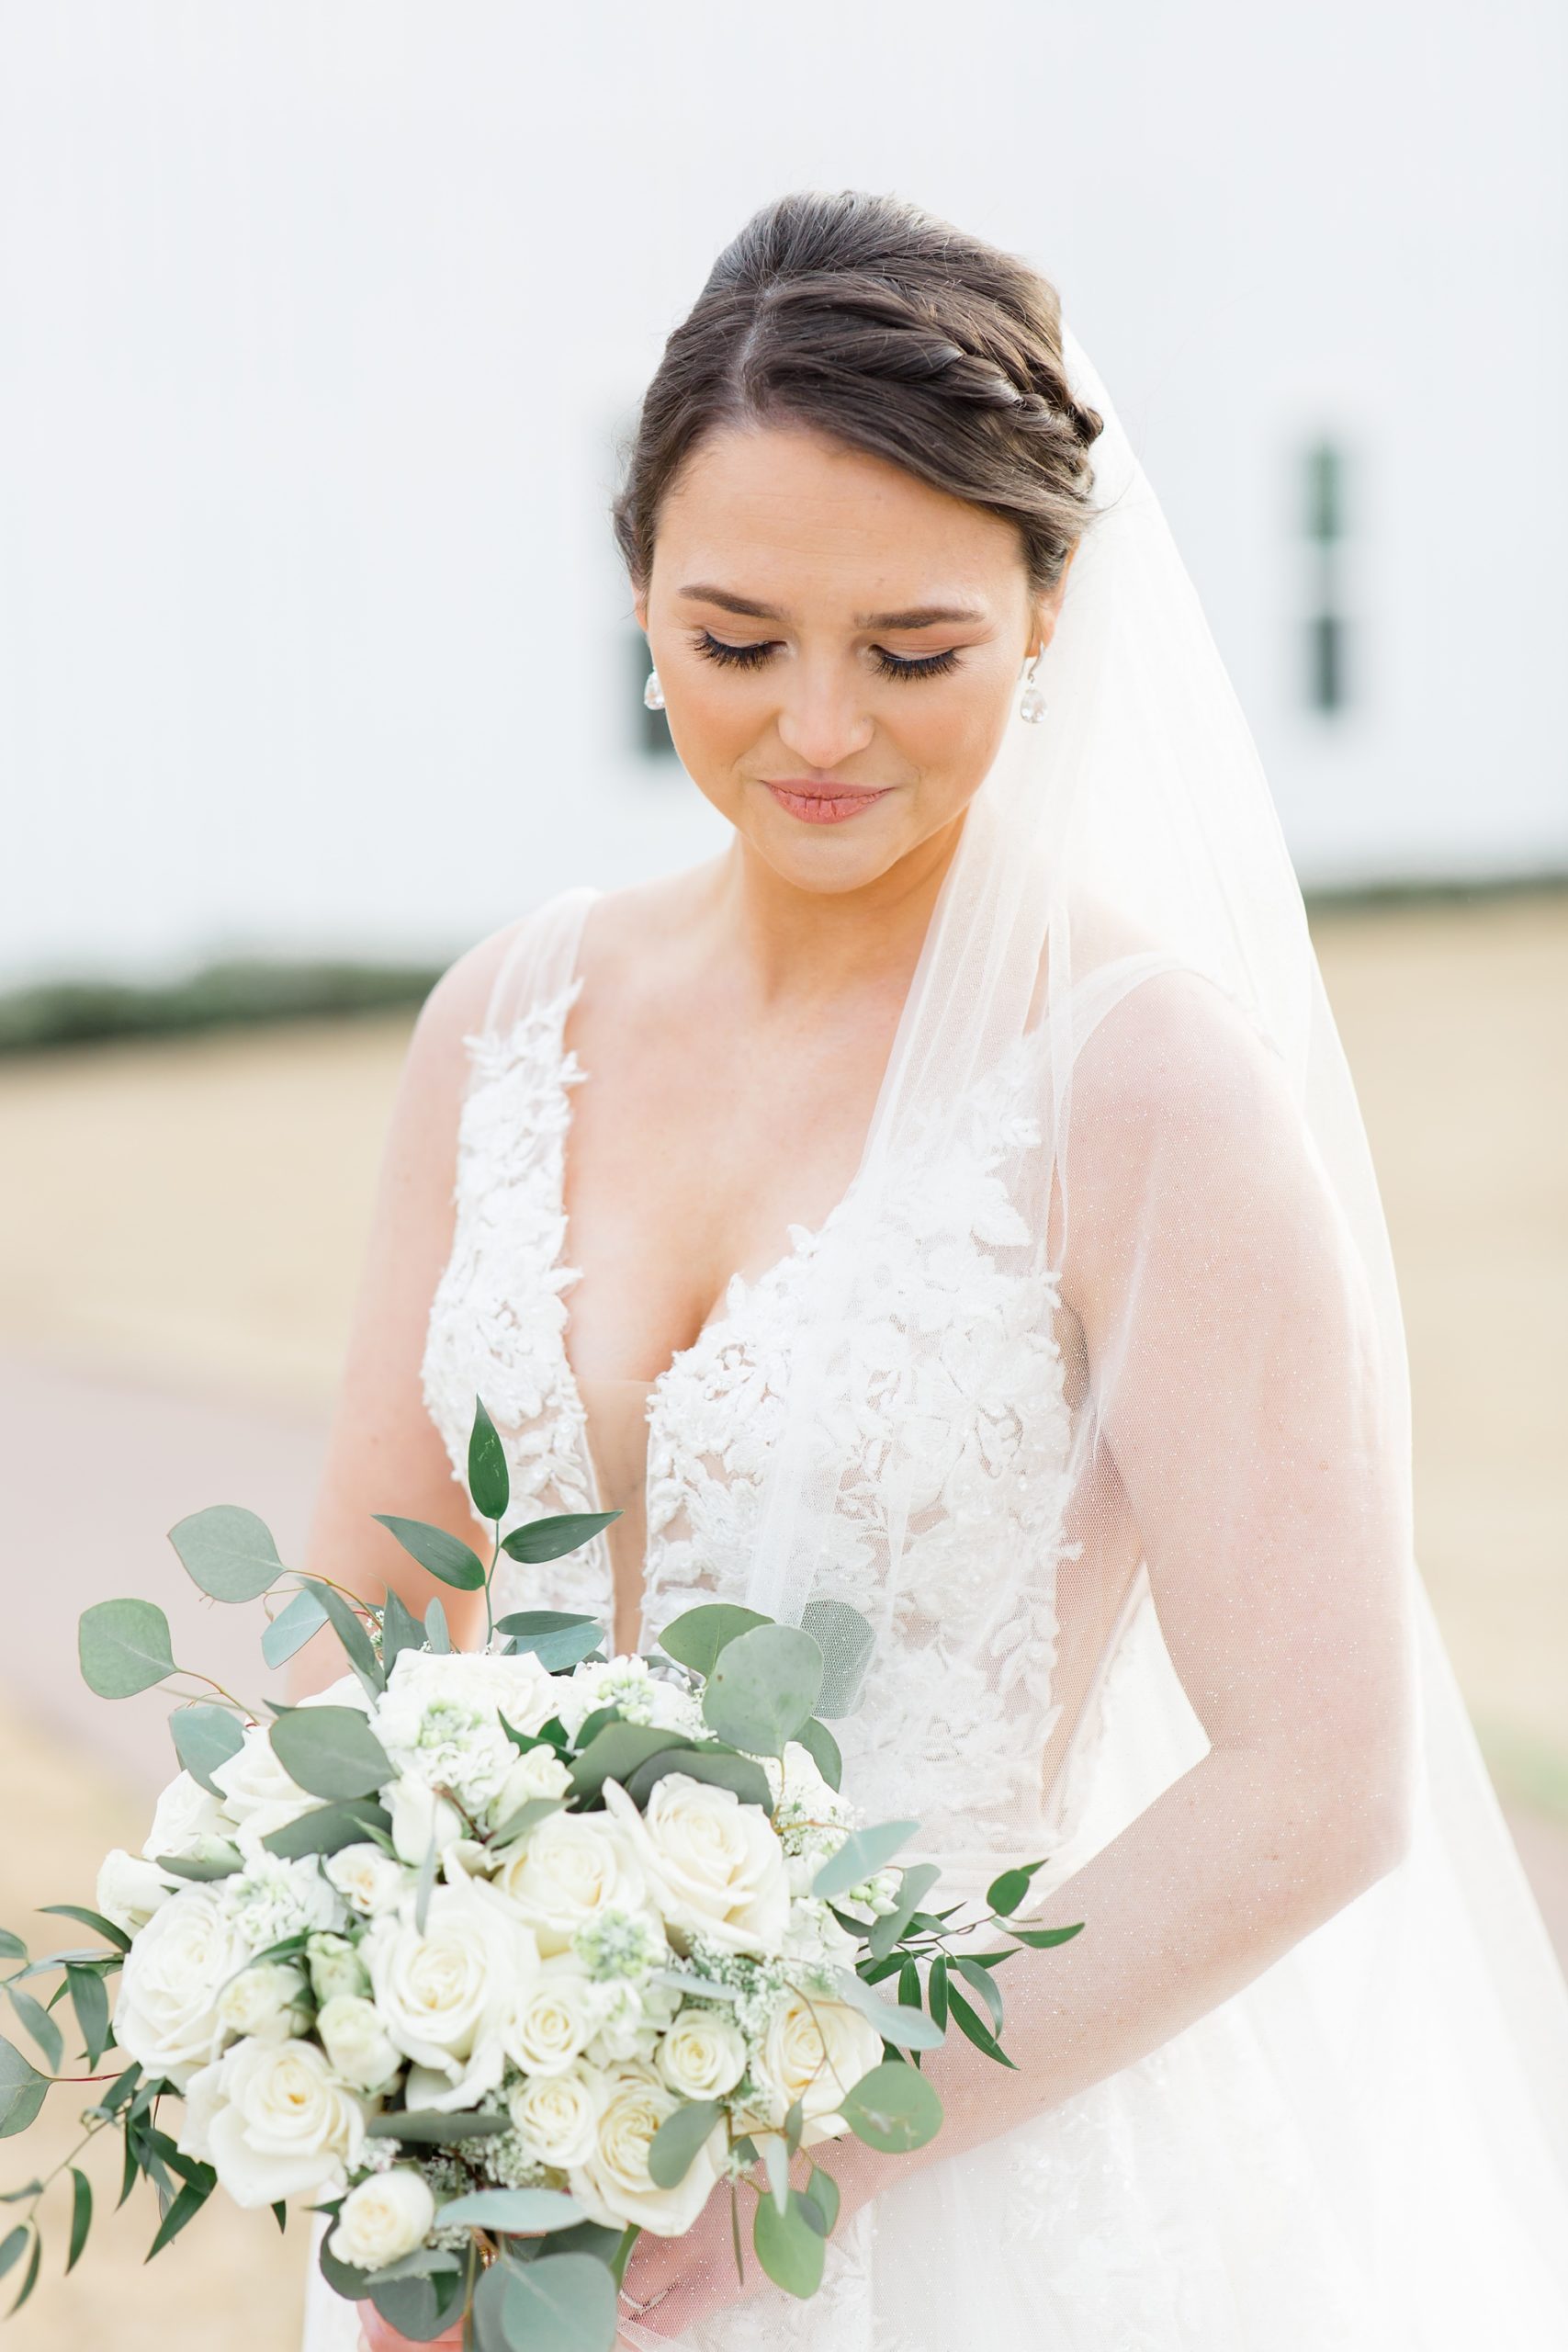 bride-to-be looks down at bouquet of white flowers